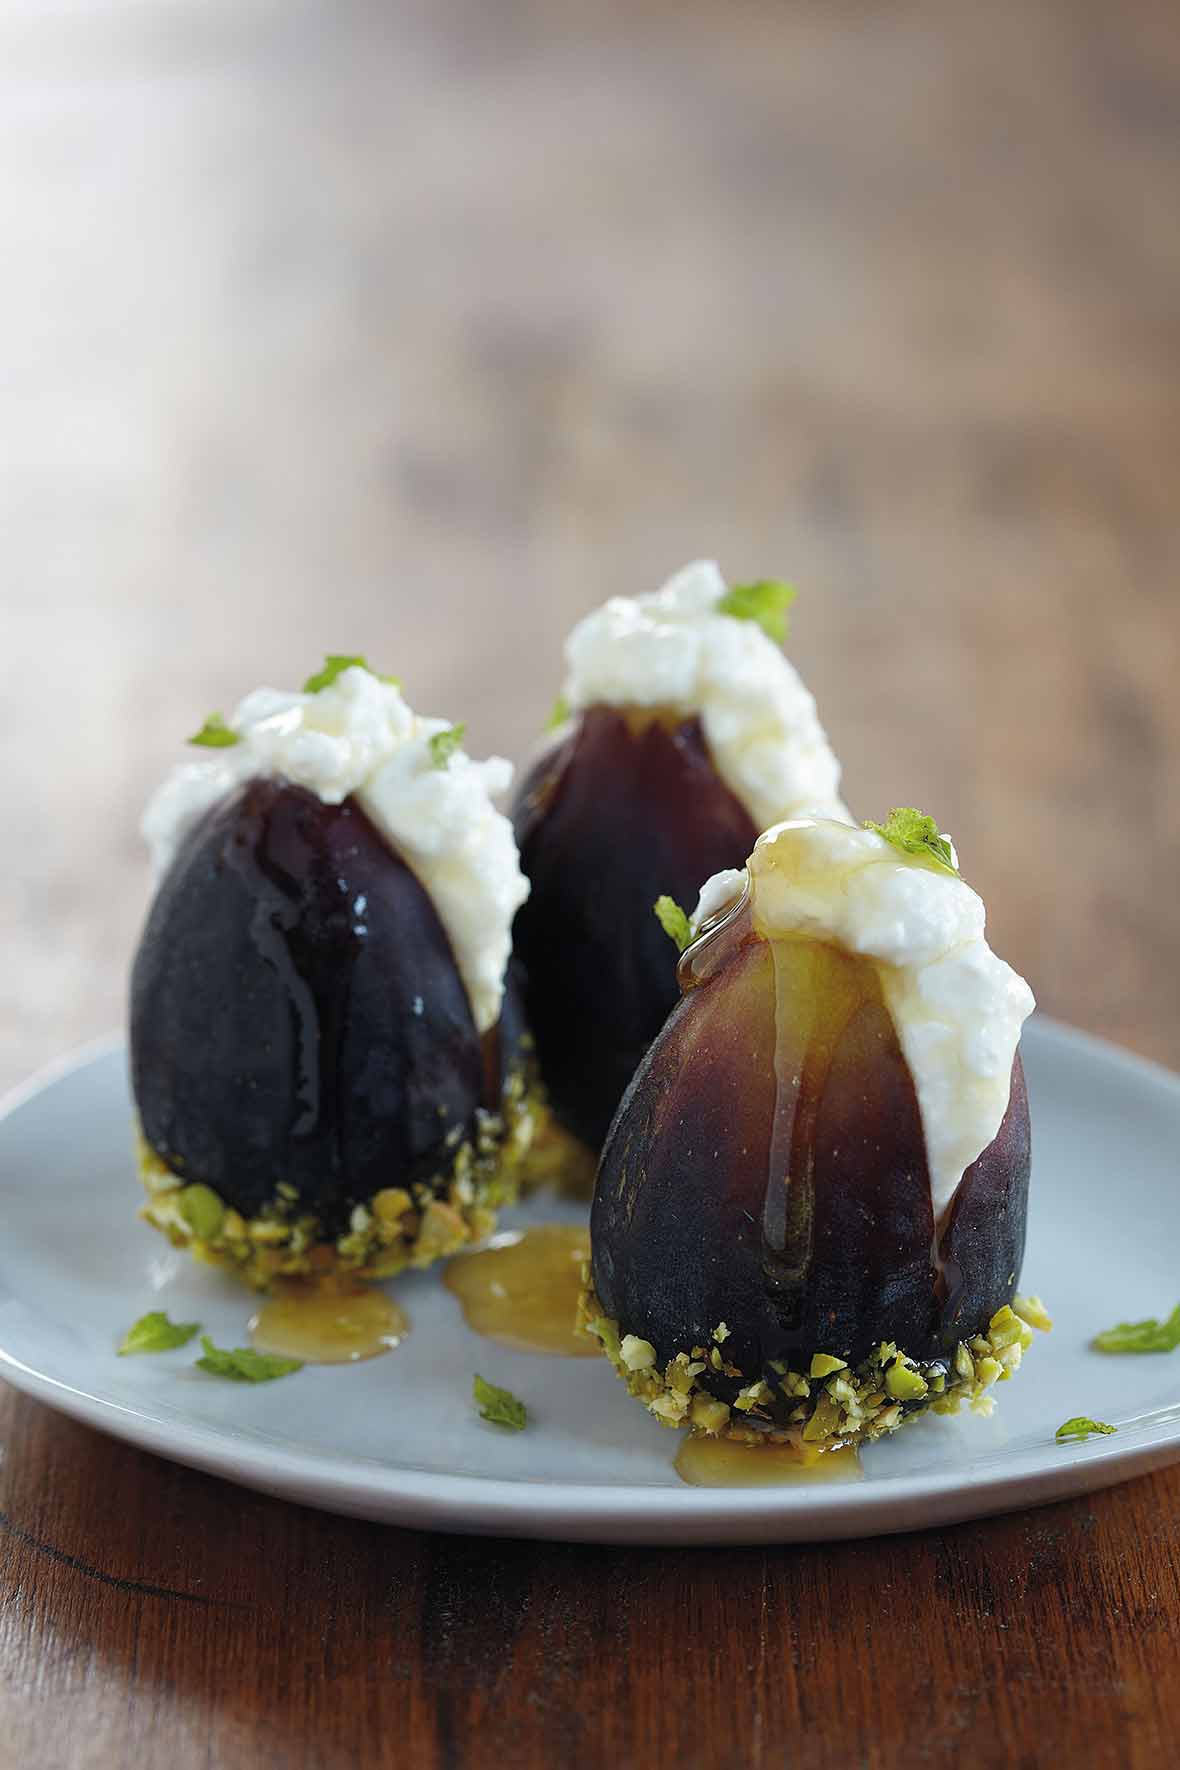 Three fresh figs with ricotta and honey and dipped in pistachios on a white plate